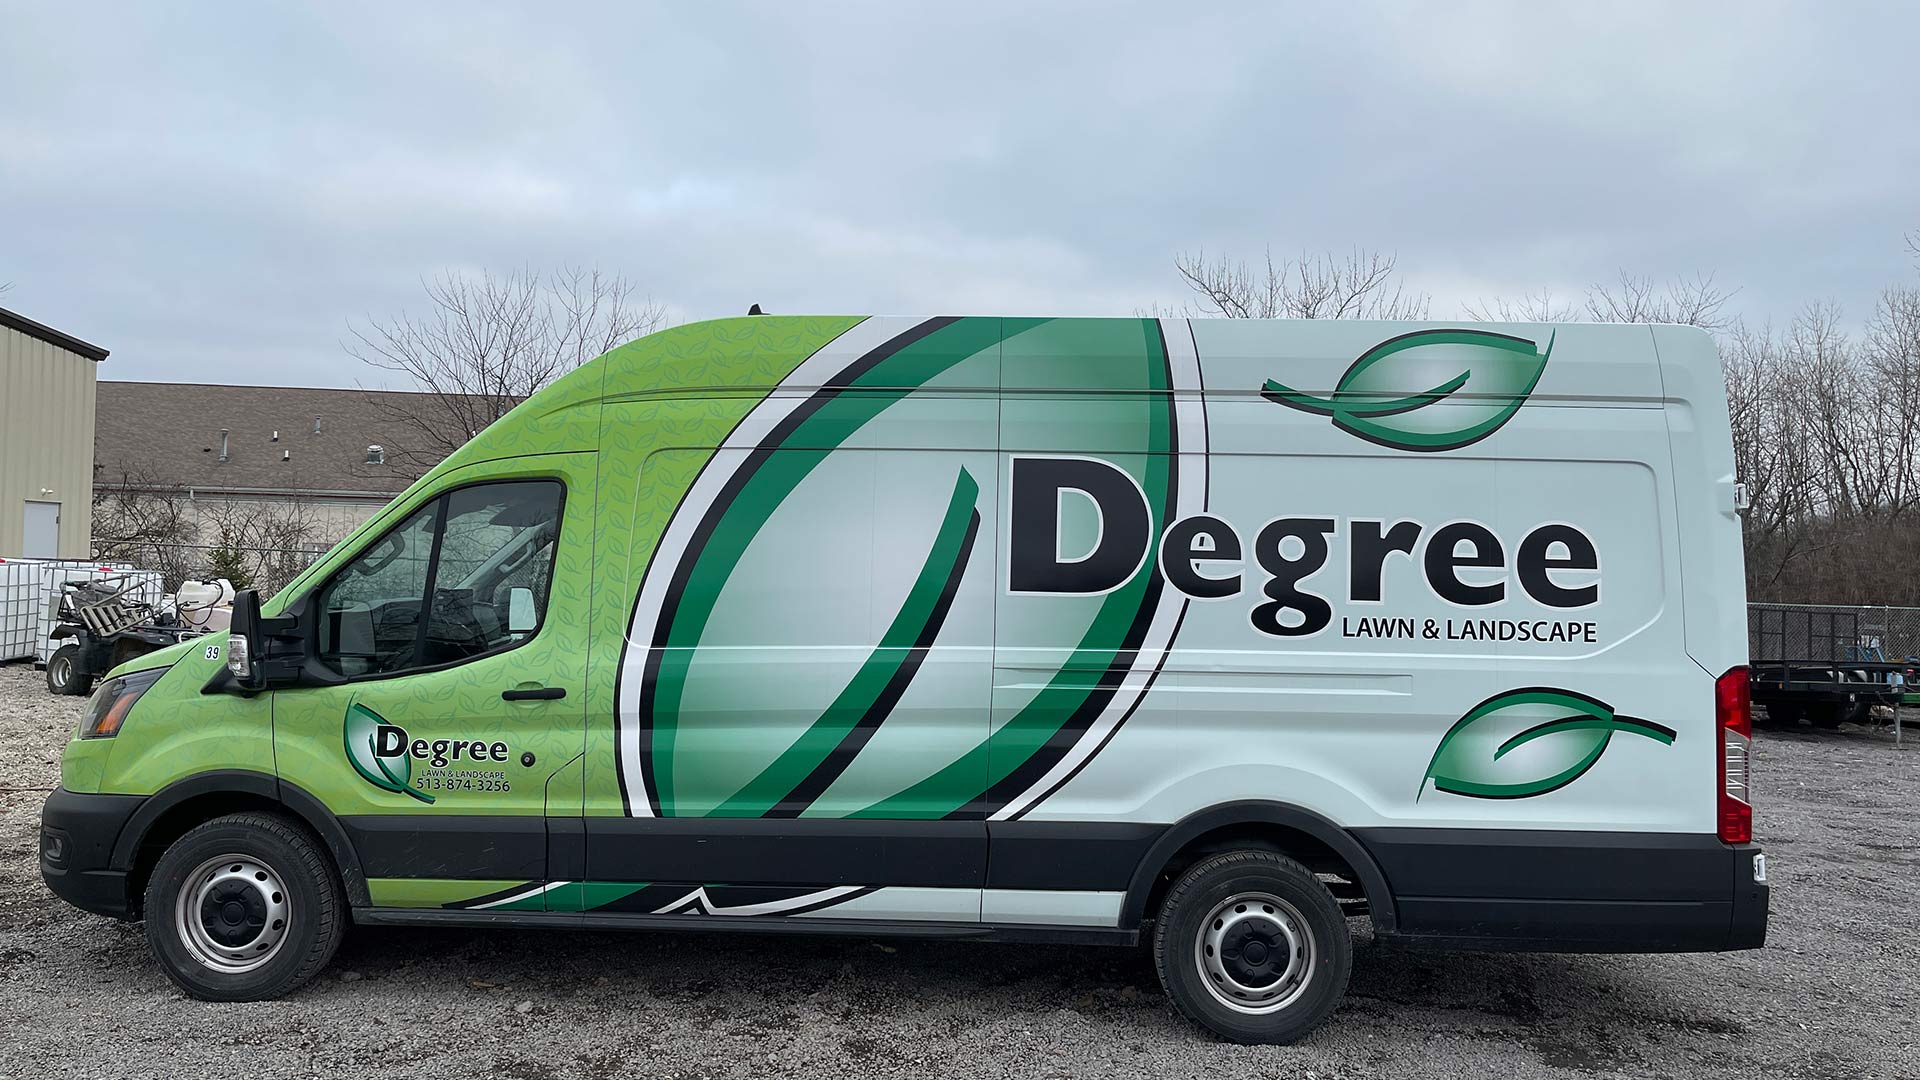 Degree Lawn & Landscape branded truck in Liberty Township, OH.